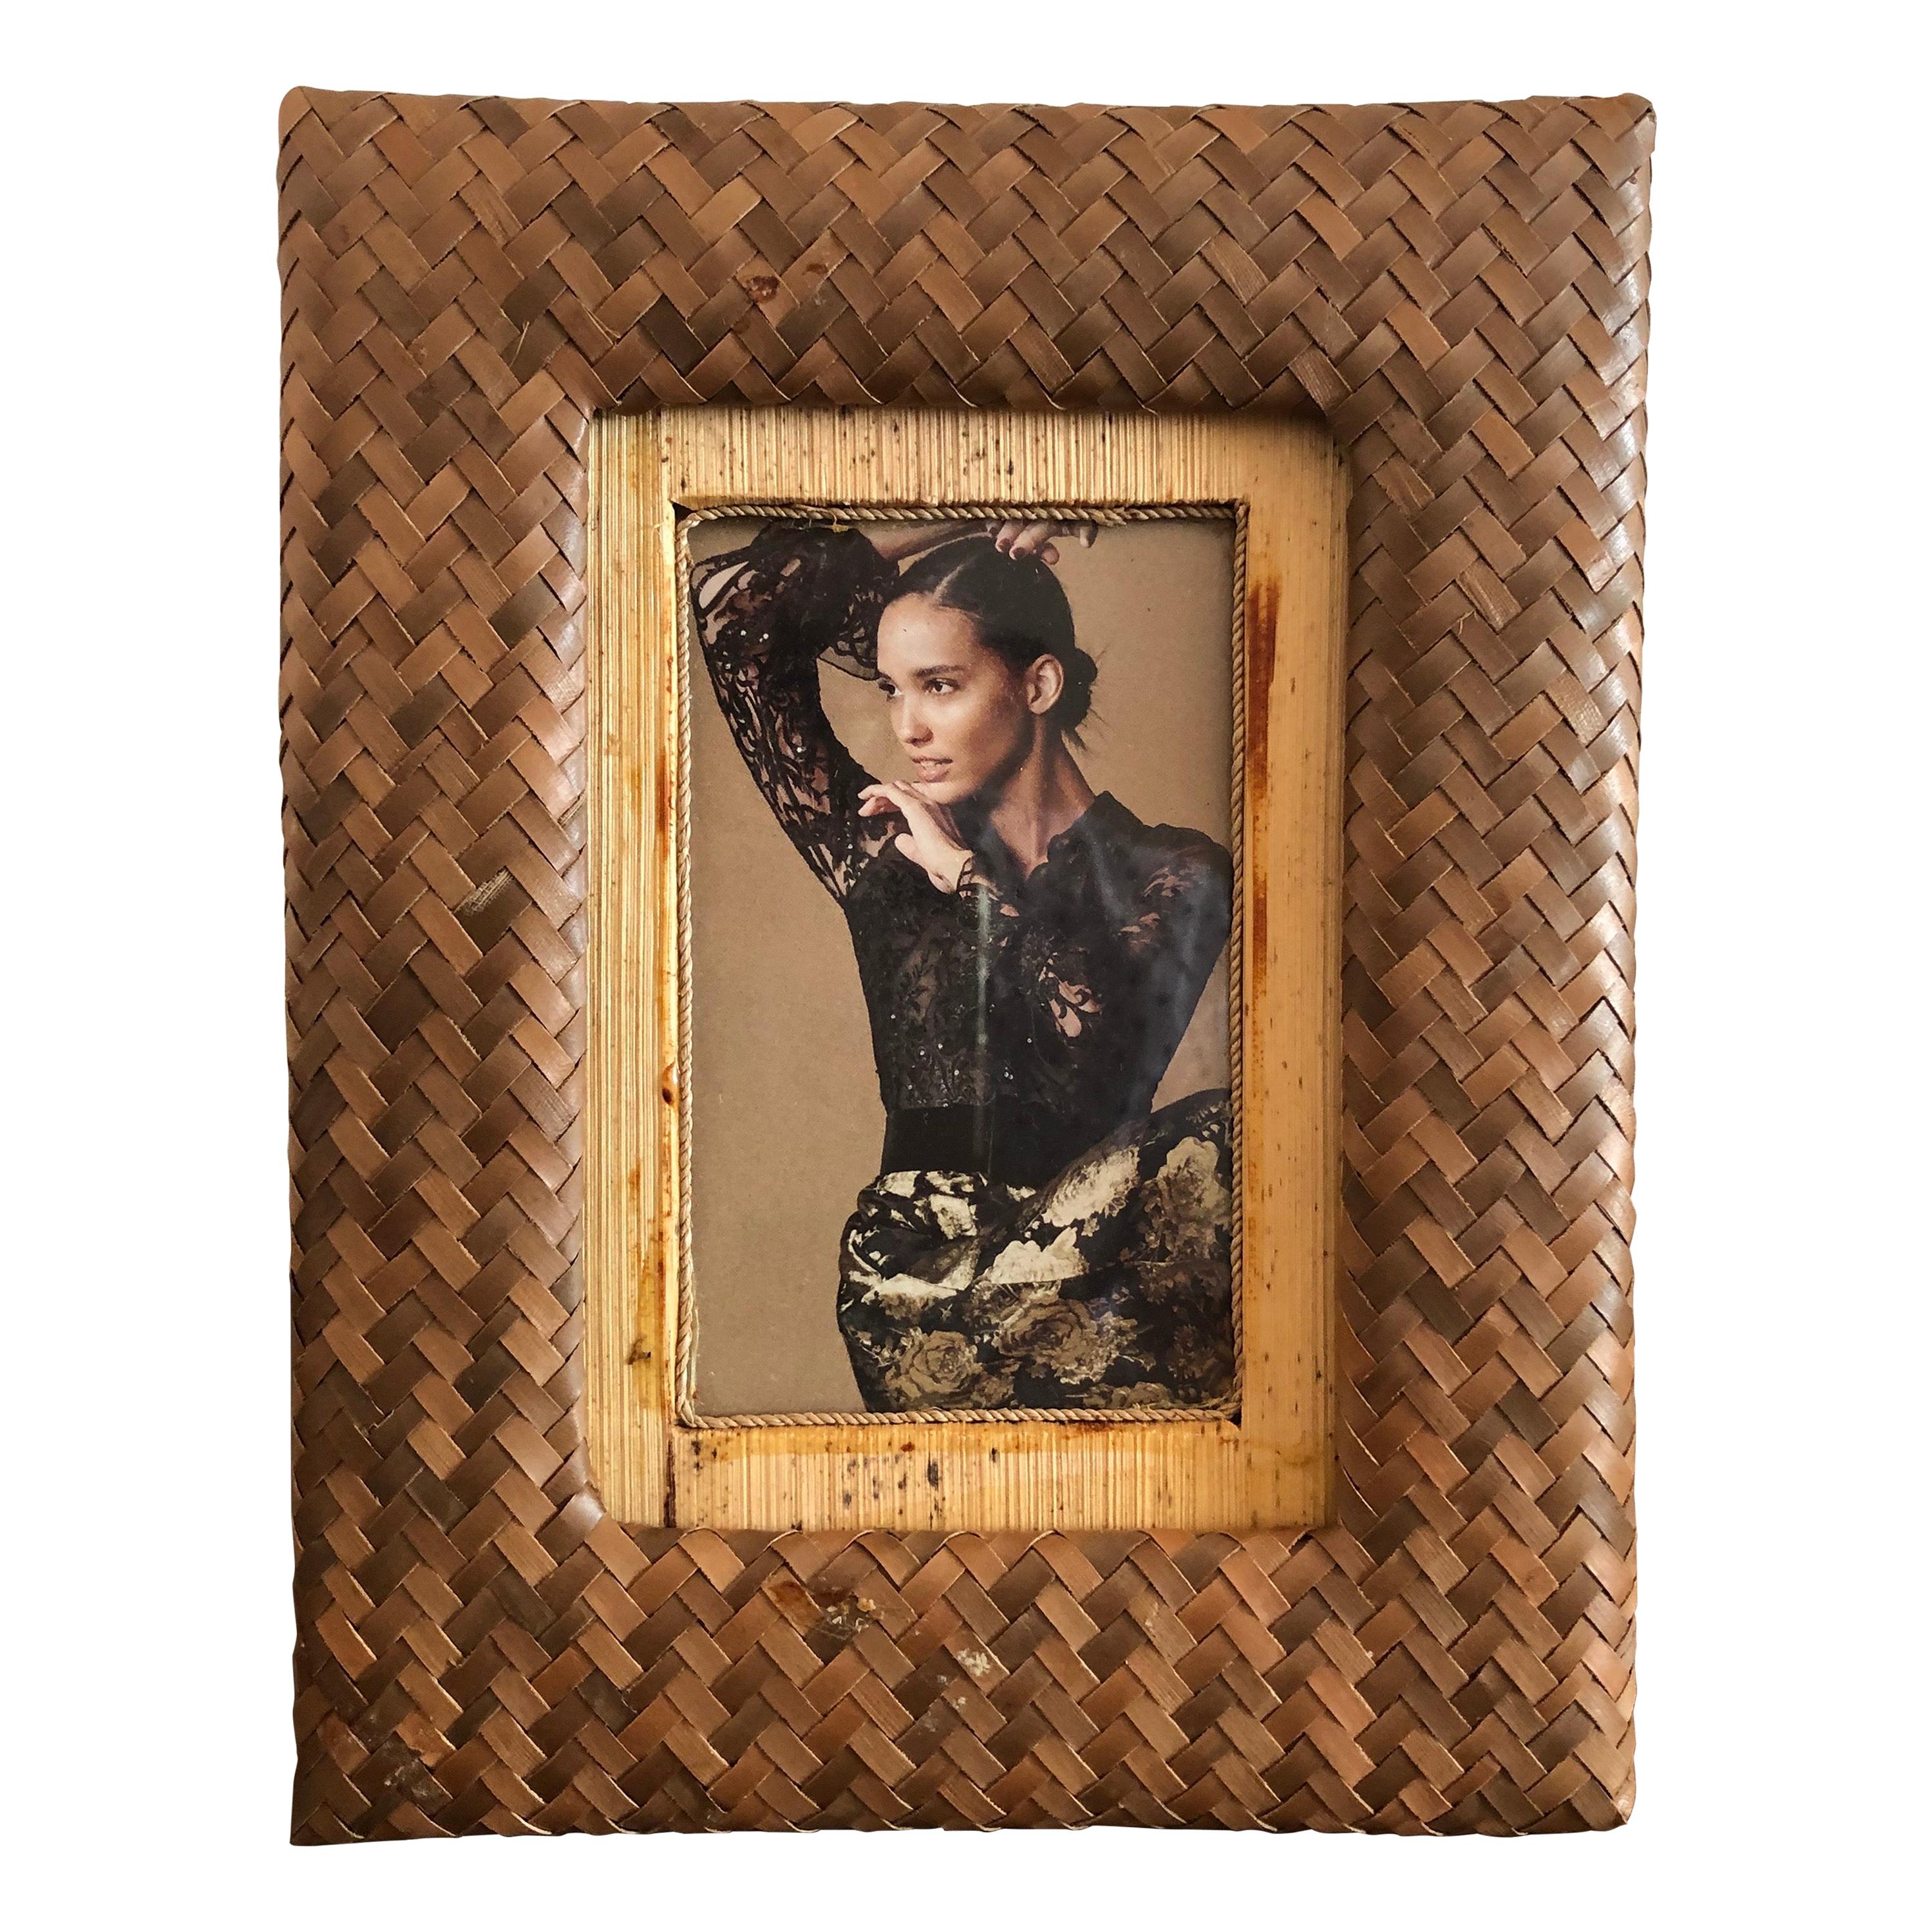 Vintage Bamboo and Rattan Woven Picture Frame